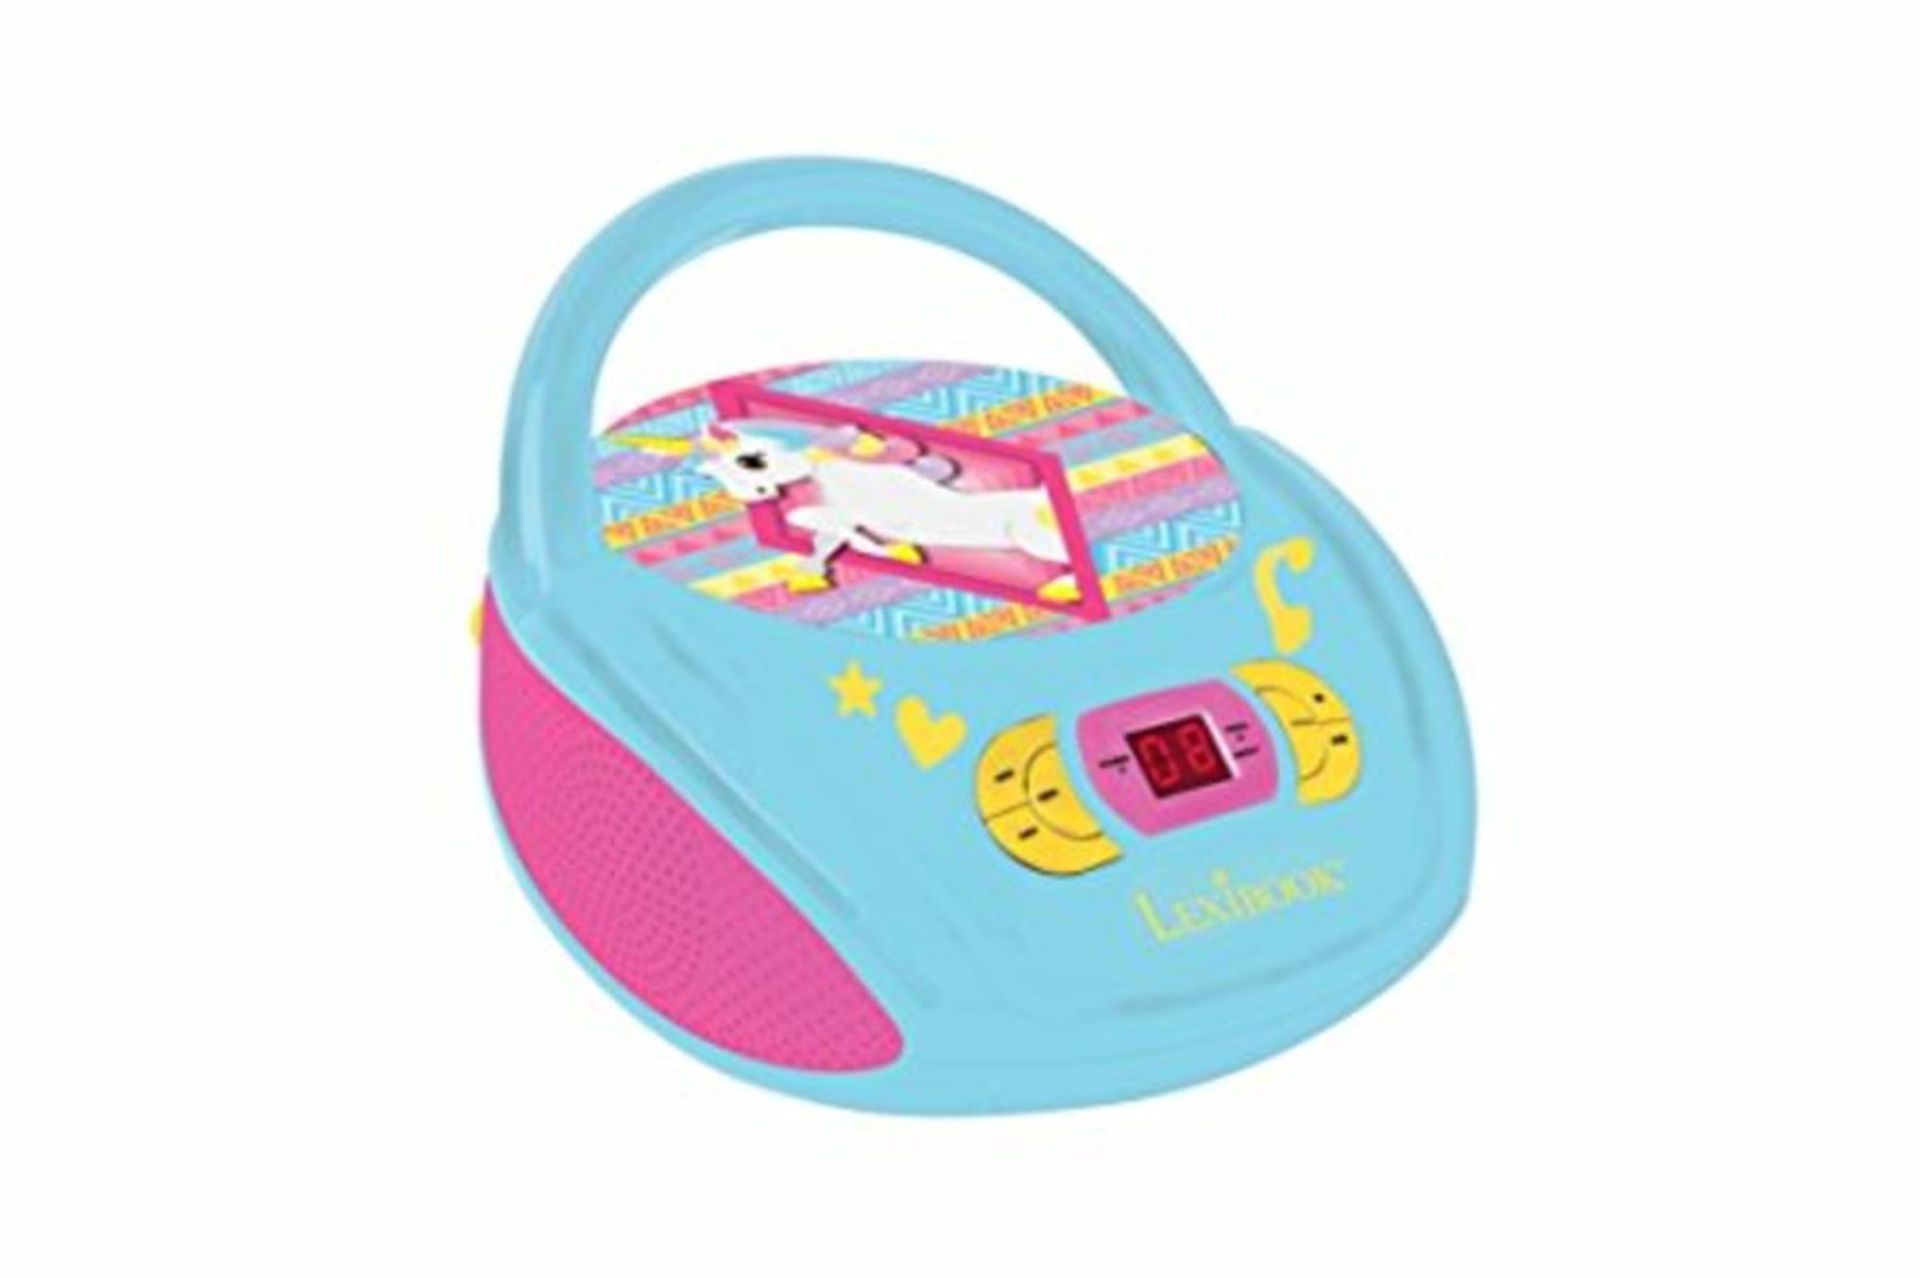 Lexibook CD Player Unicorn, AUX-in Jack, USB Port, AC or Battery-Operated, Blue/Pink,